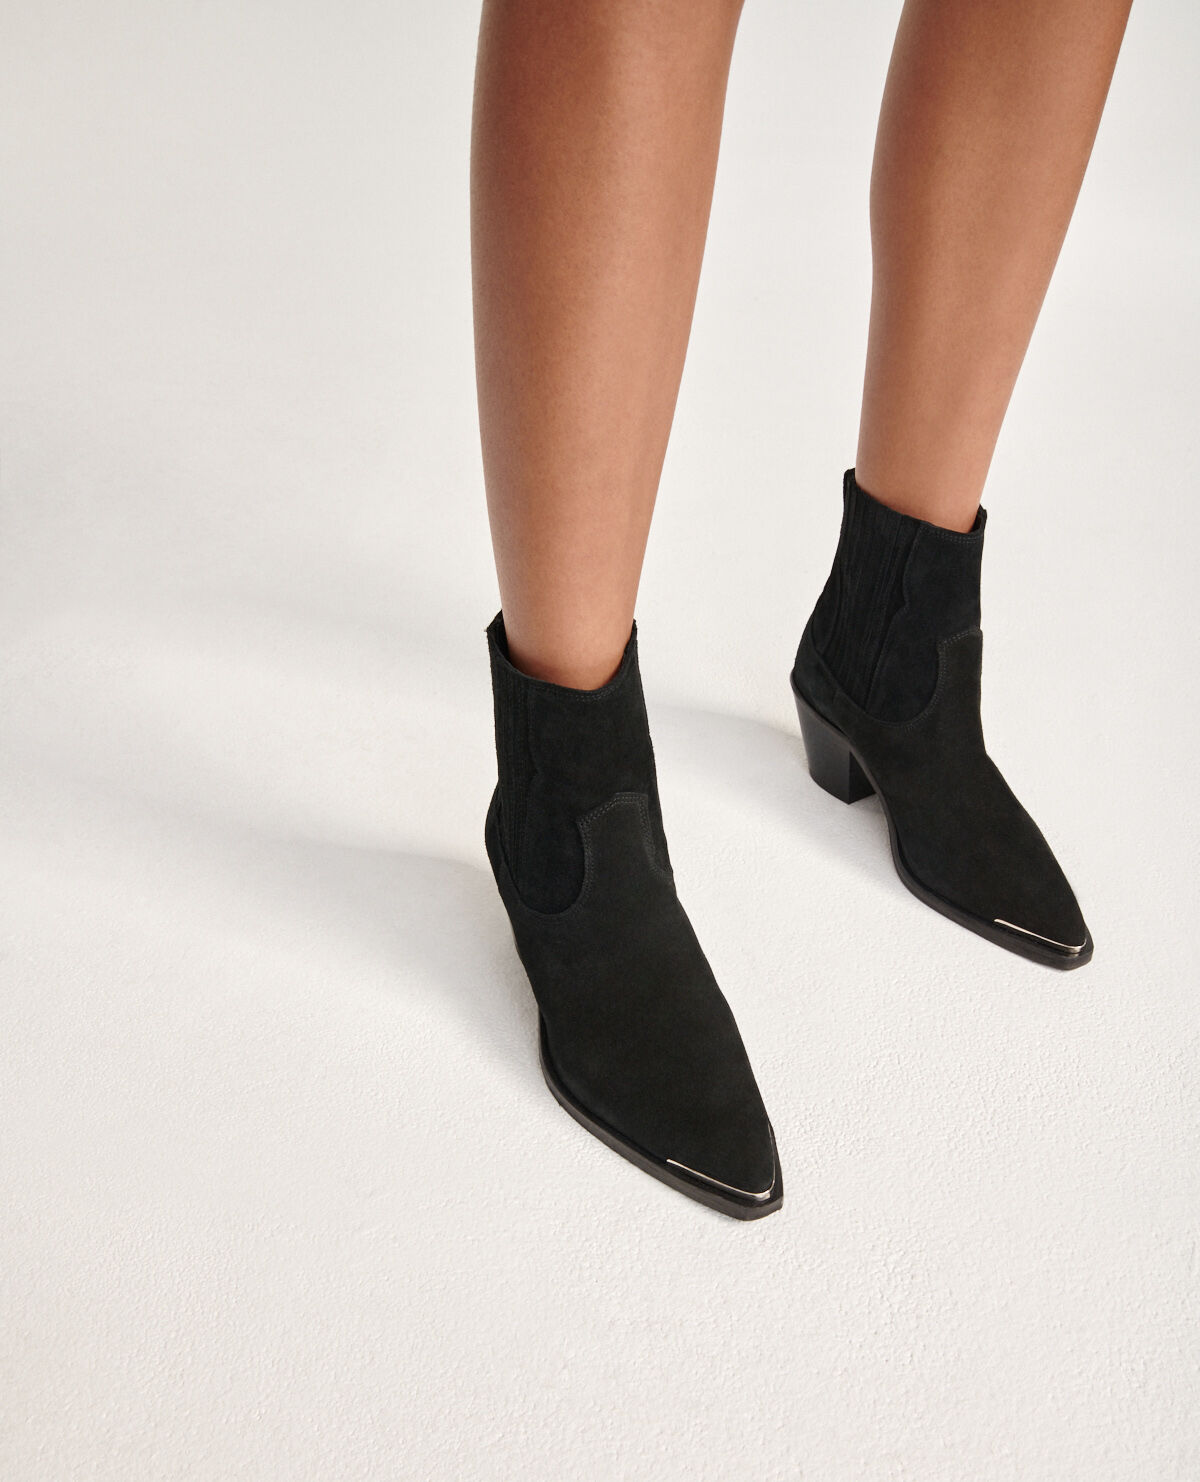 Western-style black suede ankle boots | The Kooples